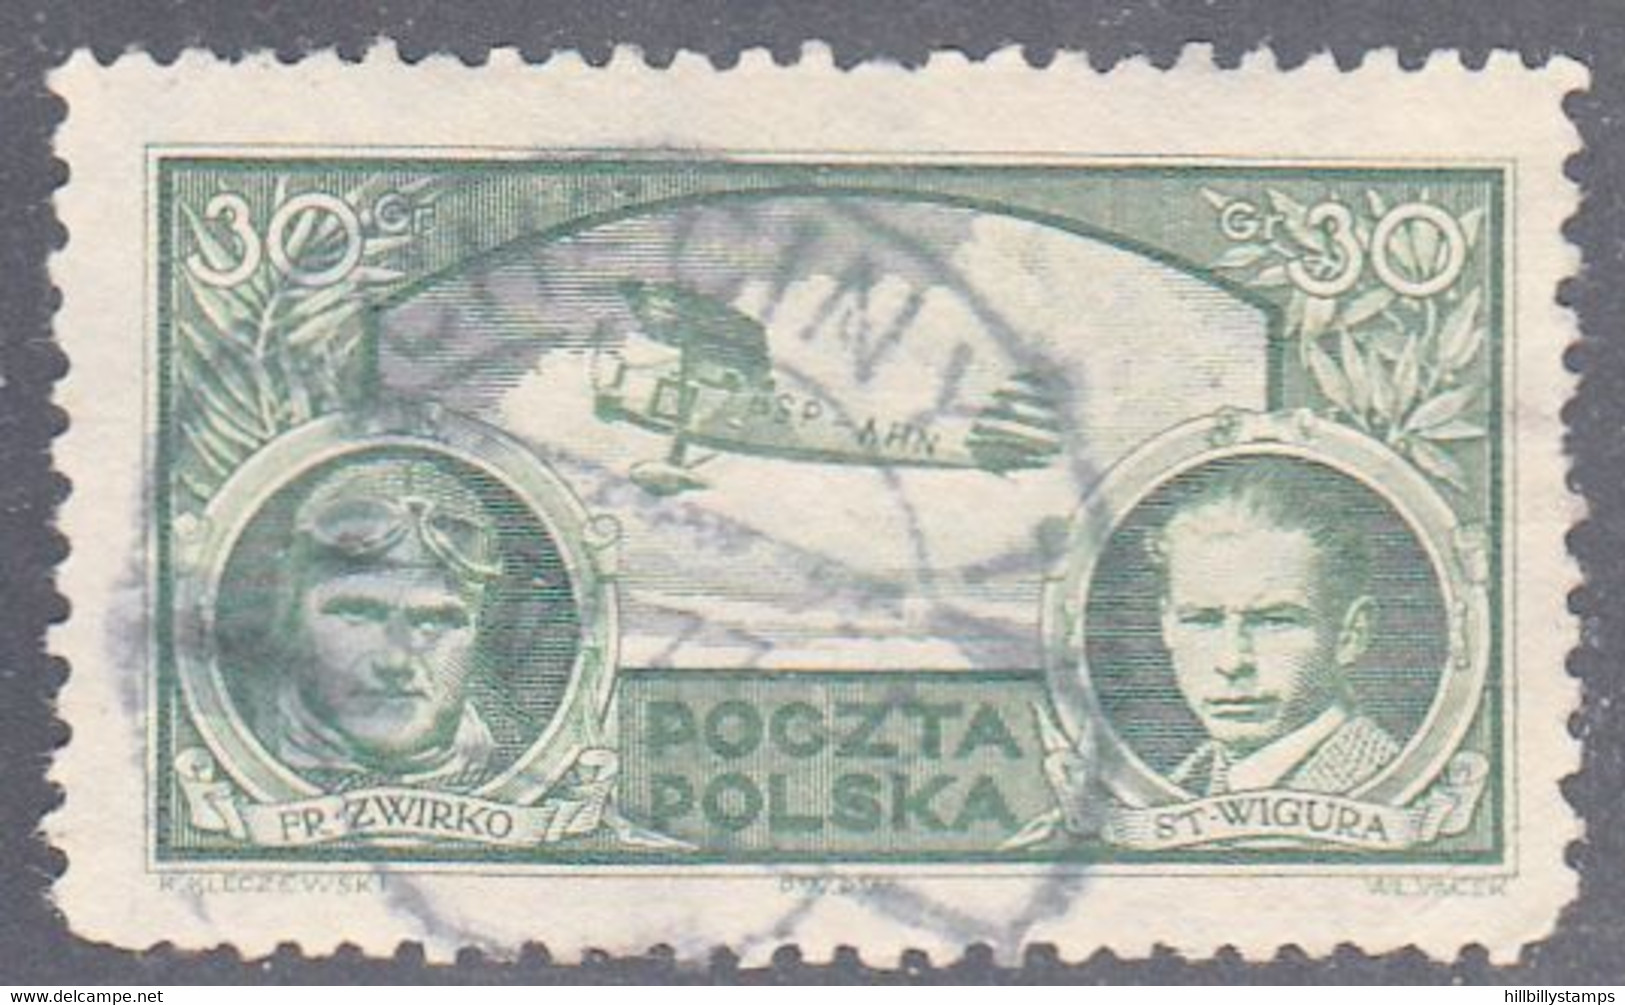 POLAND    SCOTT NO. C10  USED  YEAR 1933 - Used Stamps